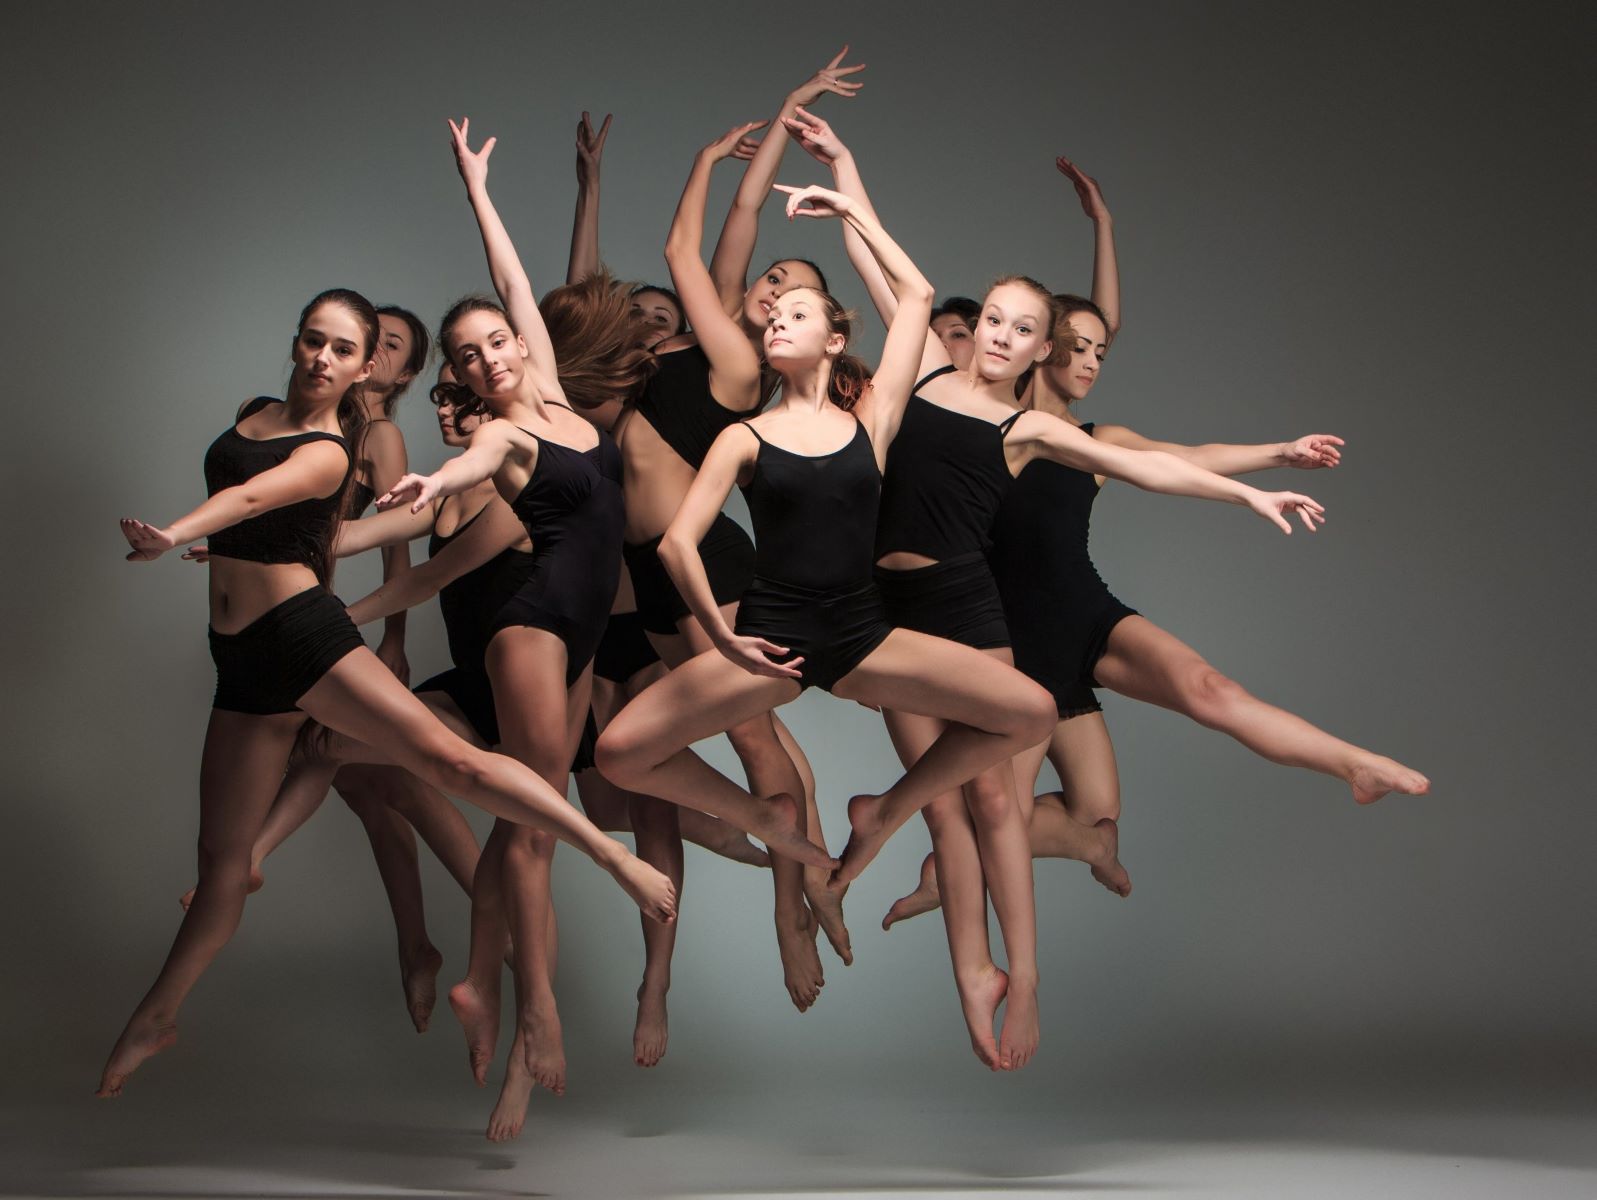 What Is Jazz Dance?